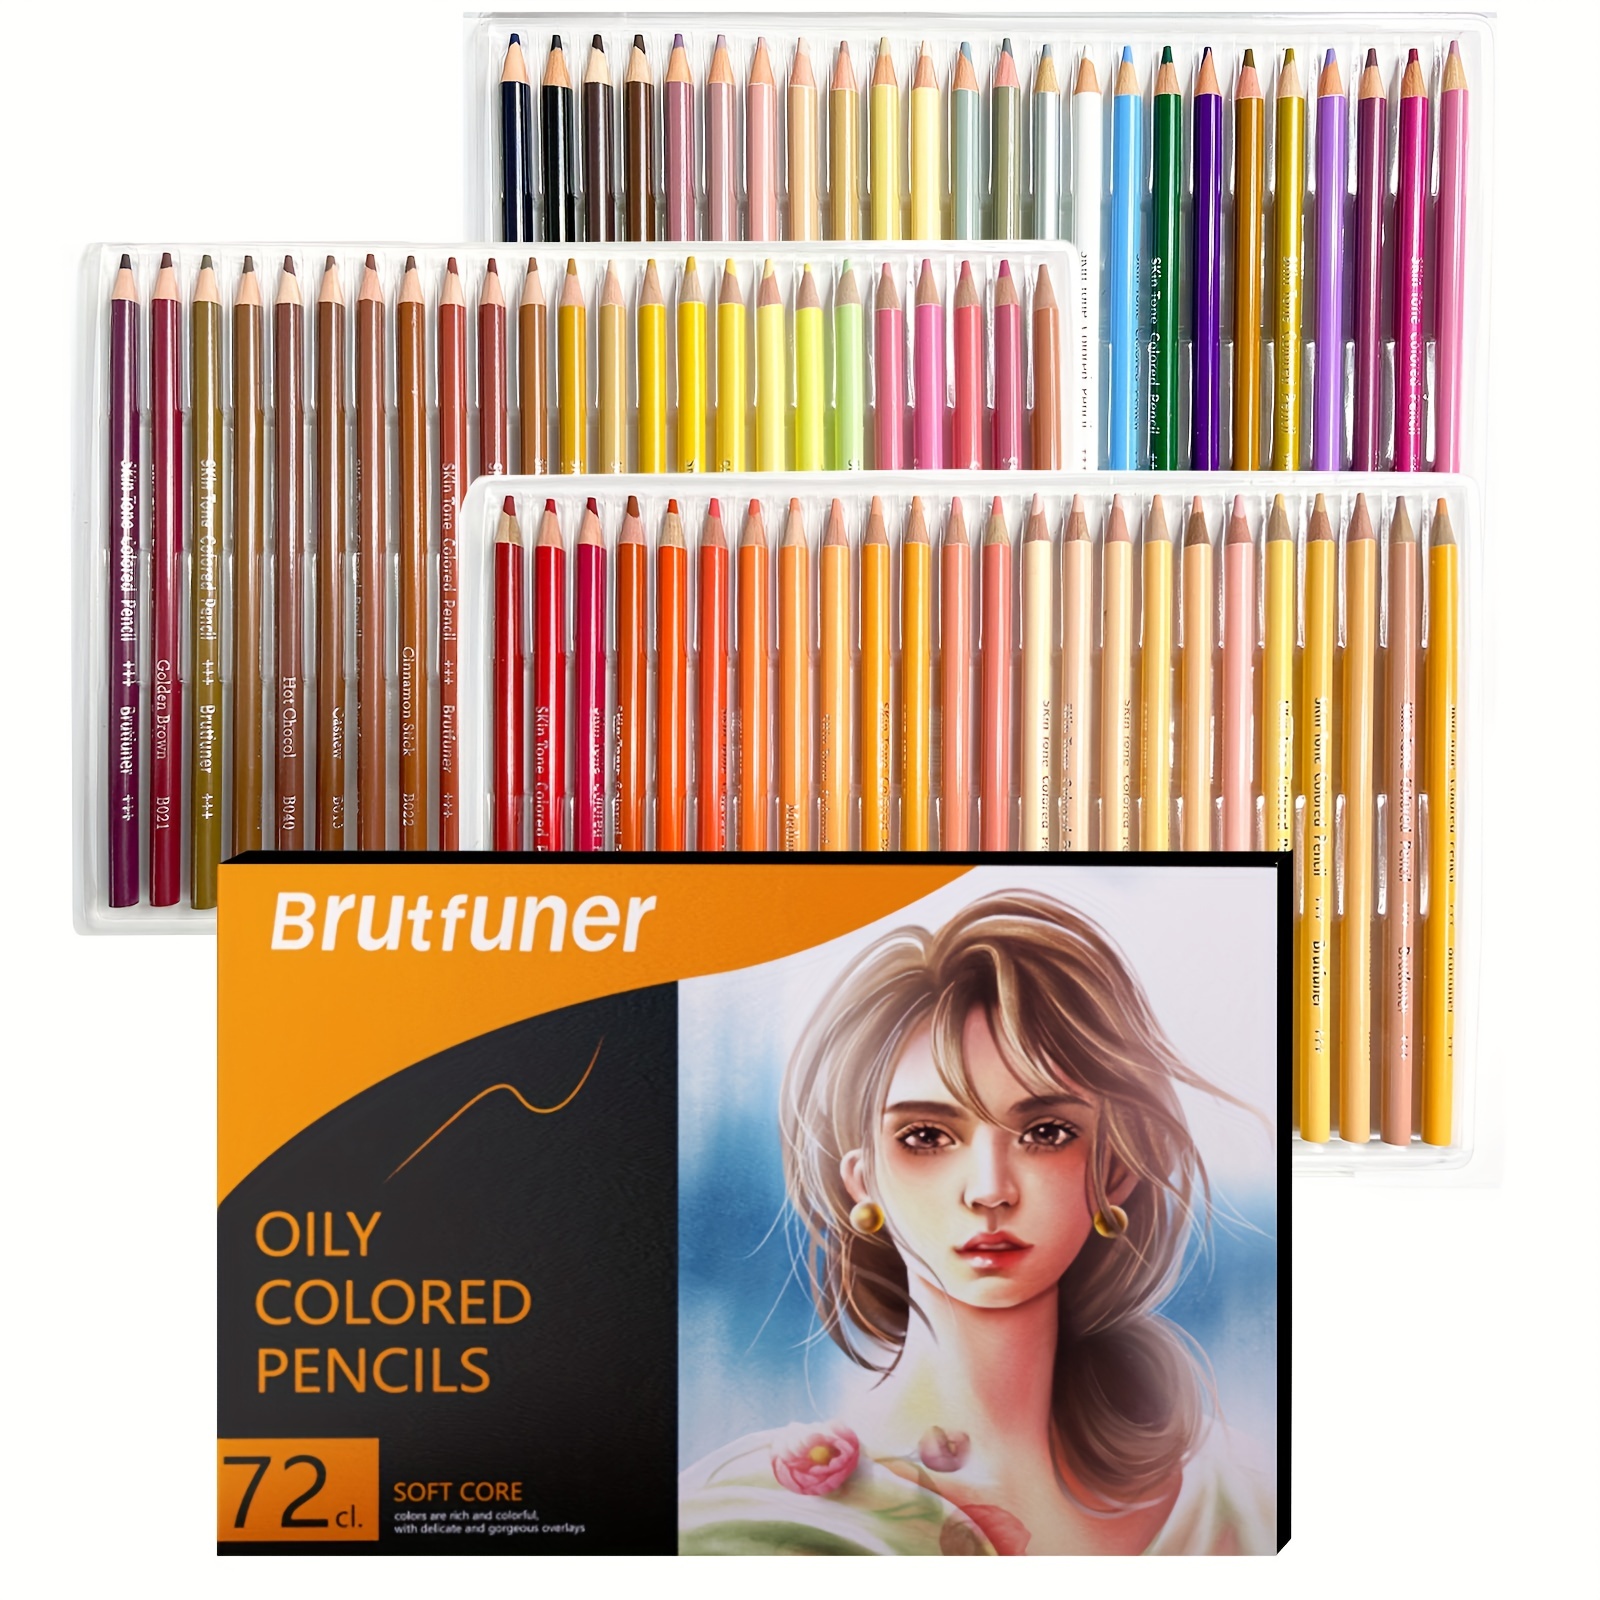 Oil Pastel Pencils for Artists 48 ct - Oil Based Colored Pencils - Drawing,  Sketching and Adult Coloring - Soft Core Art Coloring Pencils Set with